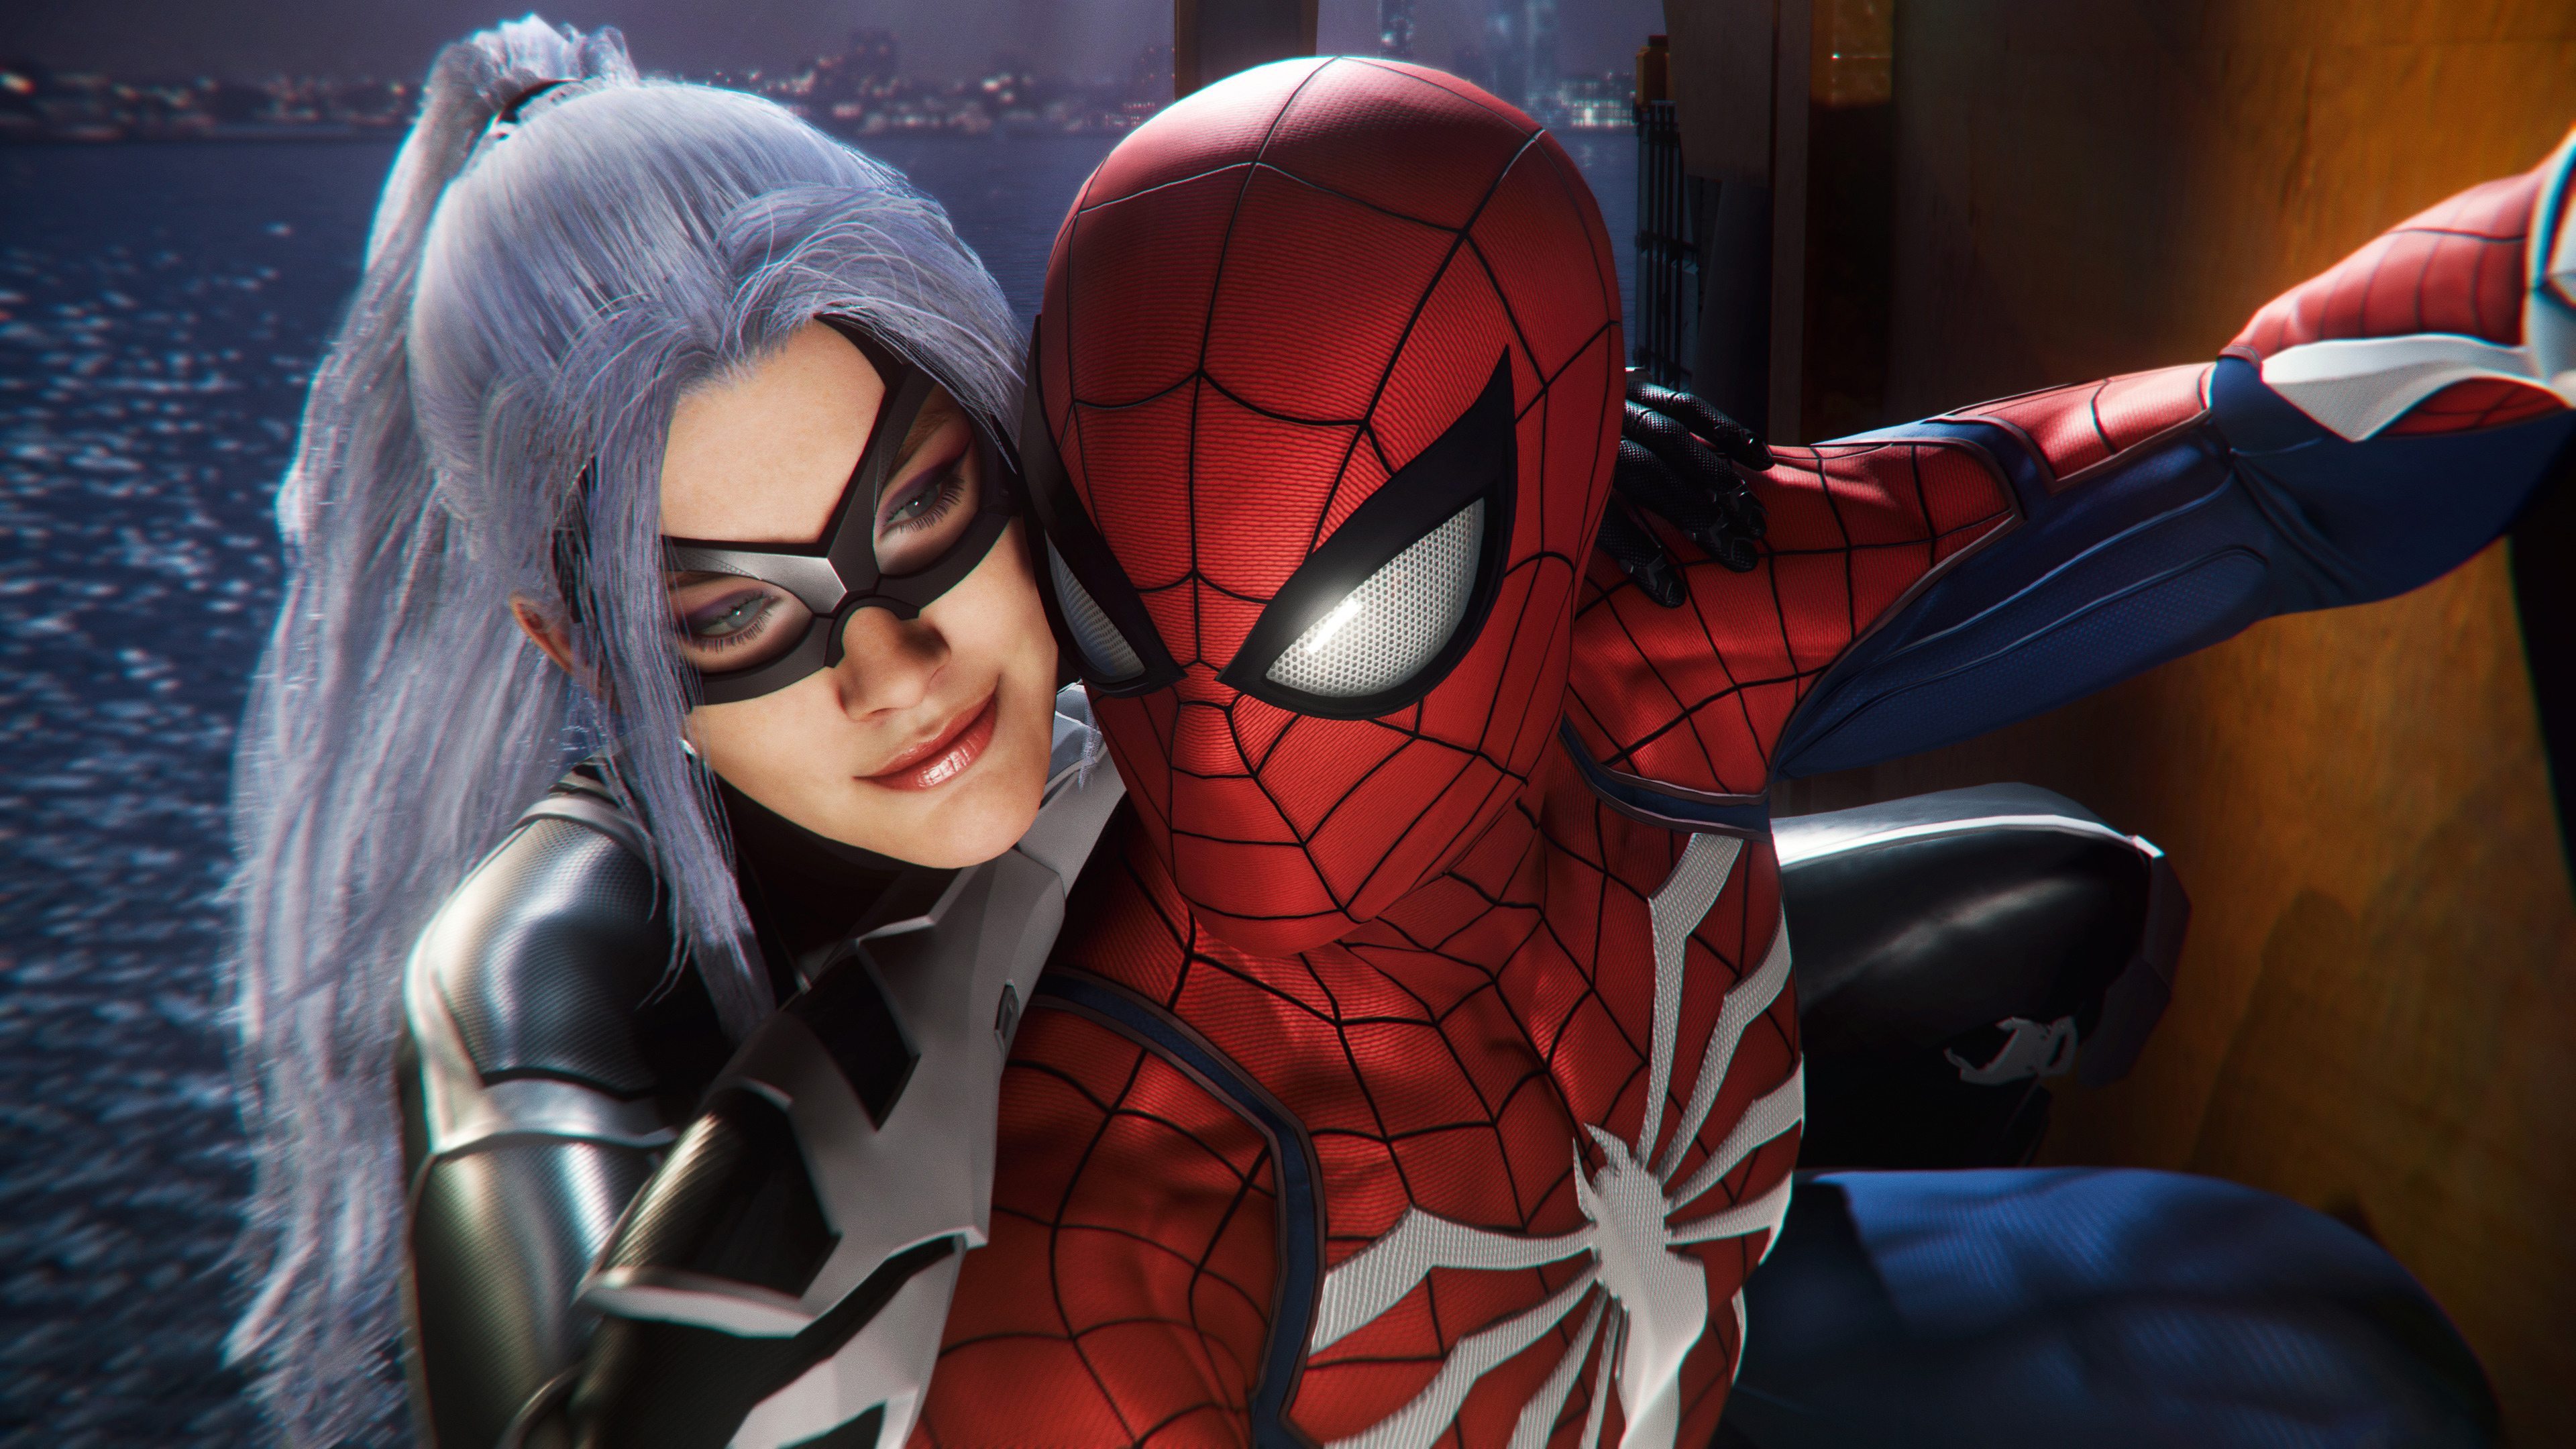 Wallpaper 4k Spiderman And Felicia Hardy In Spiderman Ps4 18 Games Wallpapers 4k Wallpapers Felicia Hardy Wallpapers Games Wallpapers Hd Wallpapers Ps Games Wallpapers Spiderman Ps4 Wallpapers Spiderman Wallpapers Superheroes Wallpapers